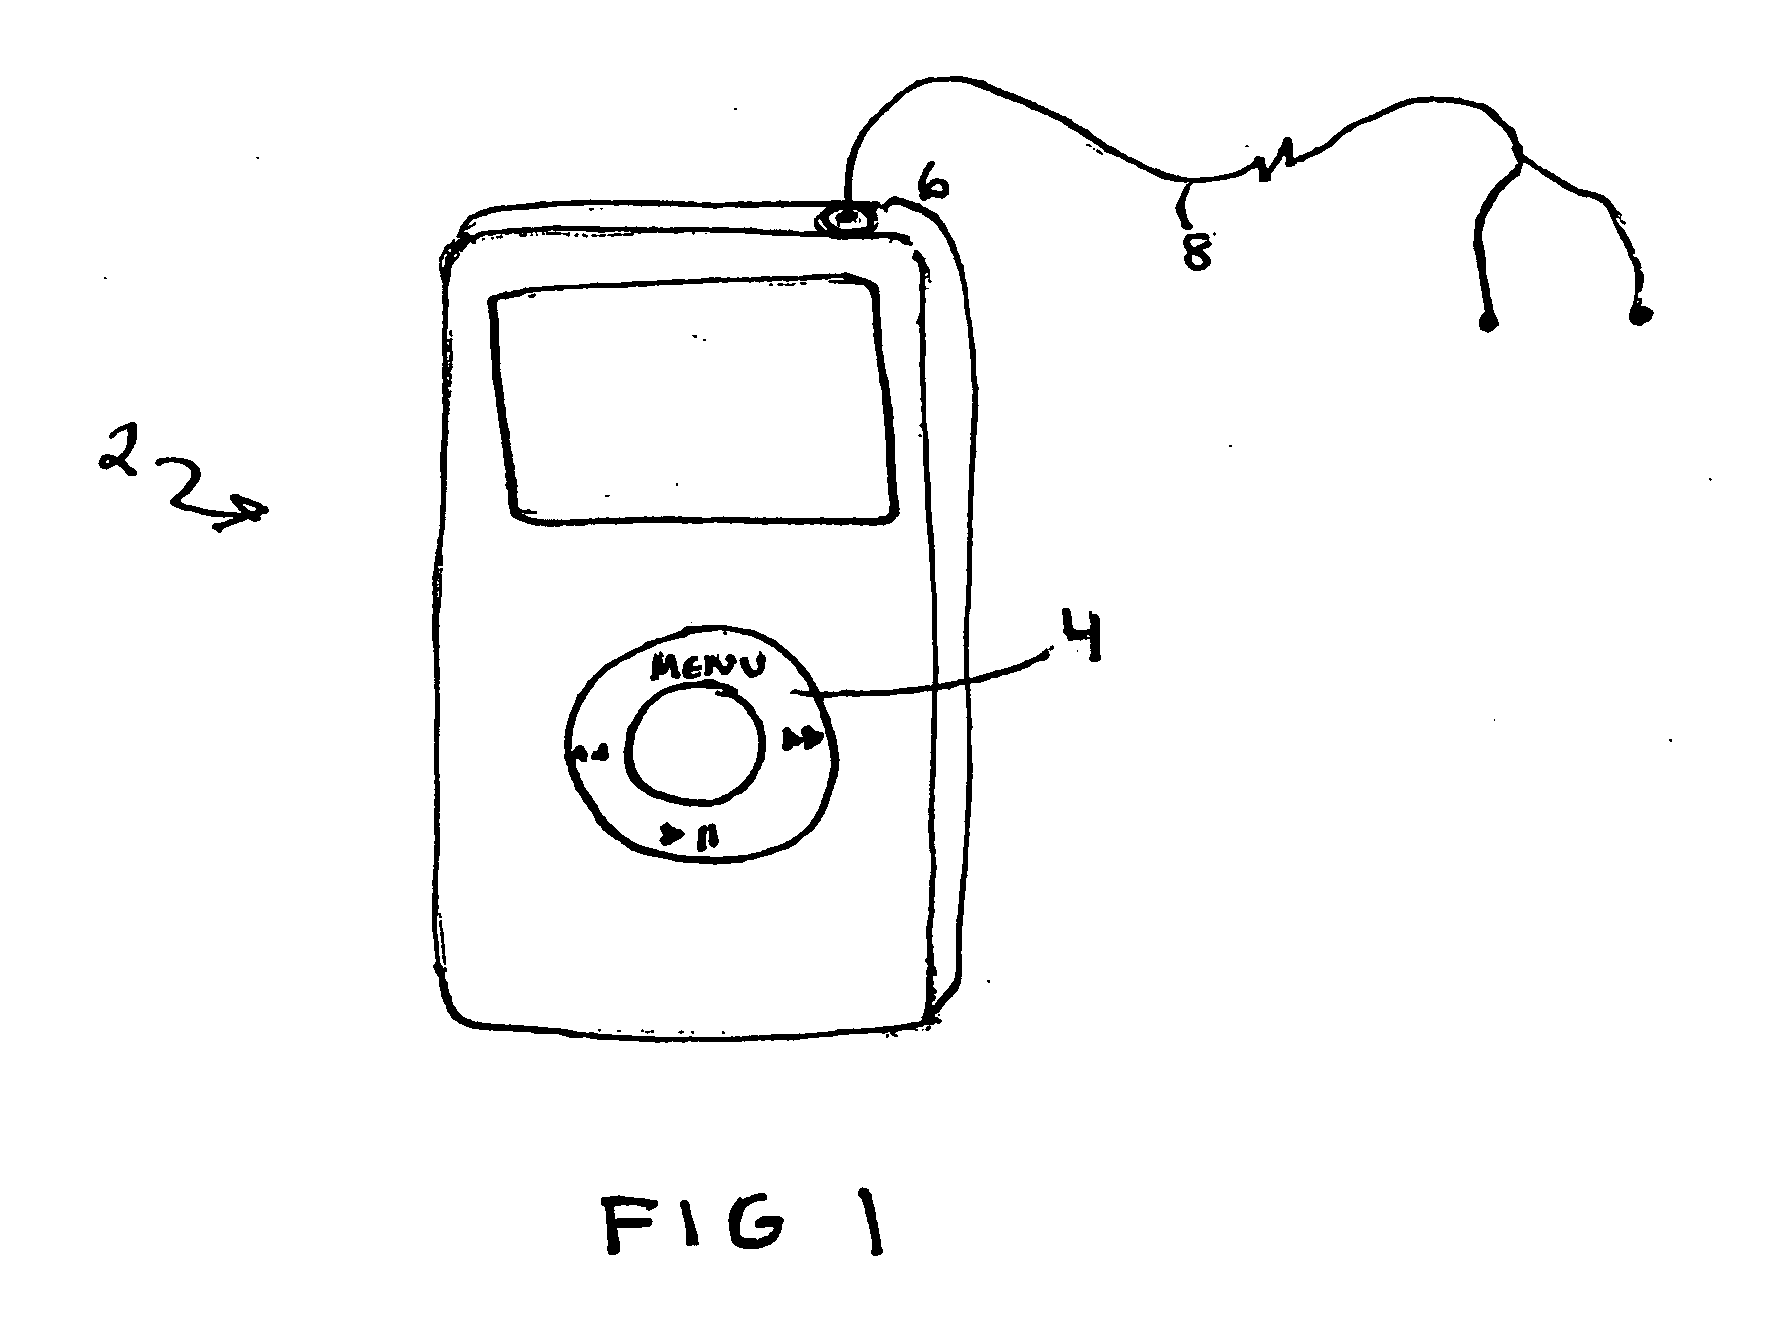 Article of apparel for holding and operating electronic devices